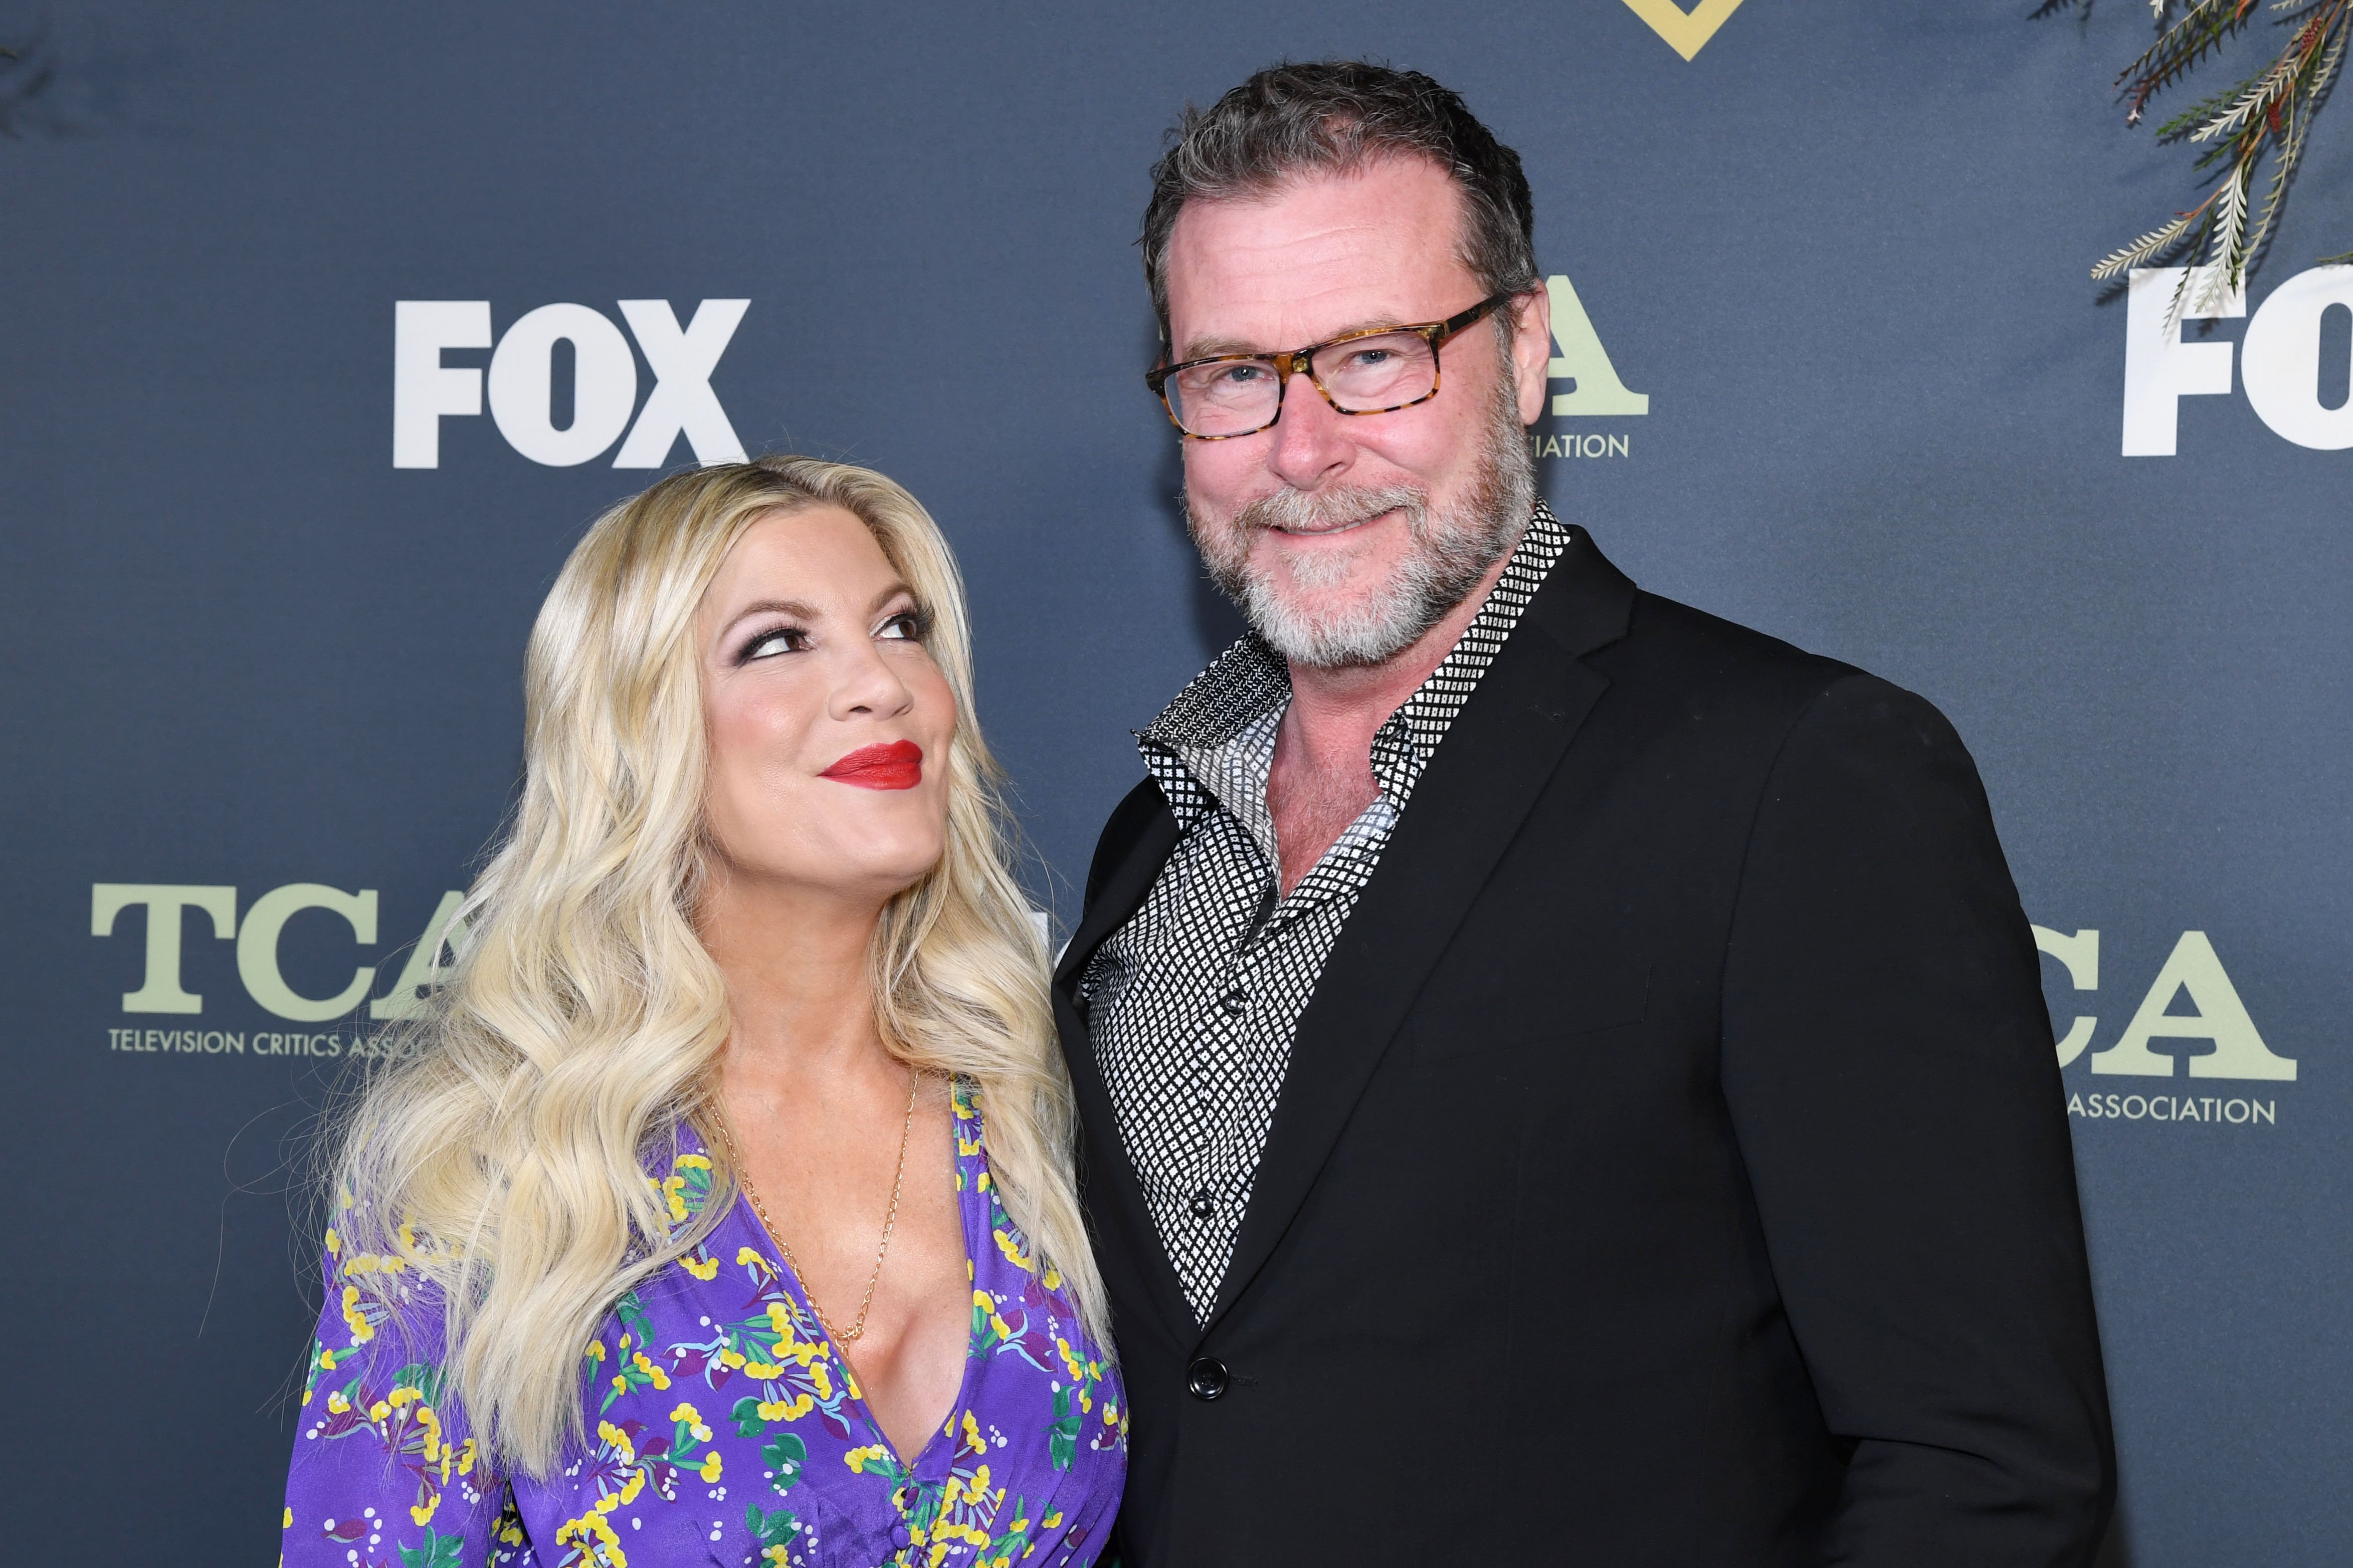 Tori Spelling and Dean McDermott attend Fox Winter TCA in Los Angeles, California on February 6, 2019 | Photo: Getty Images